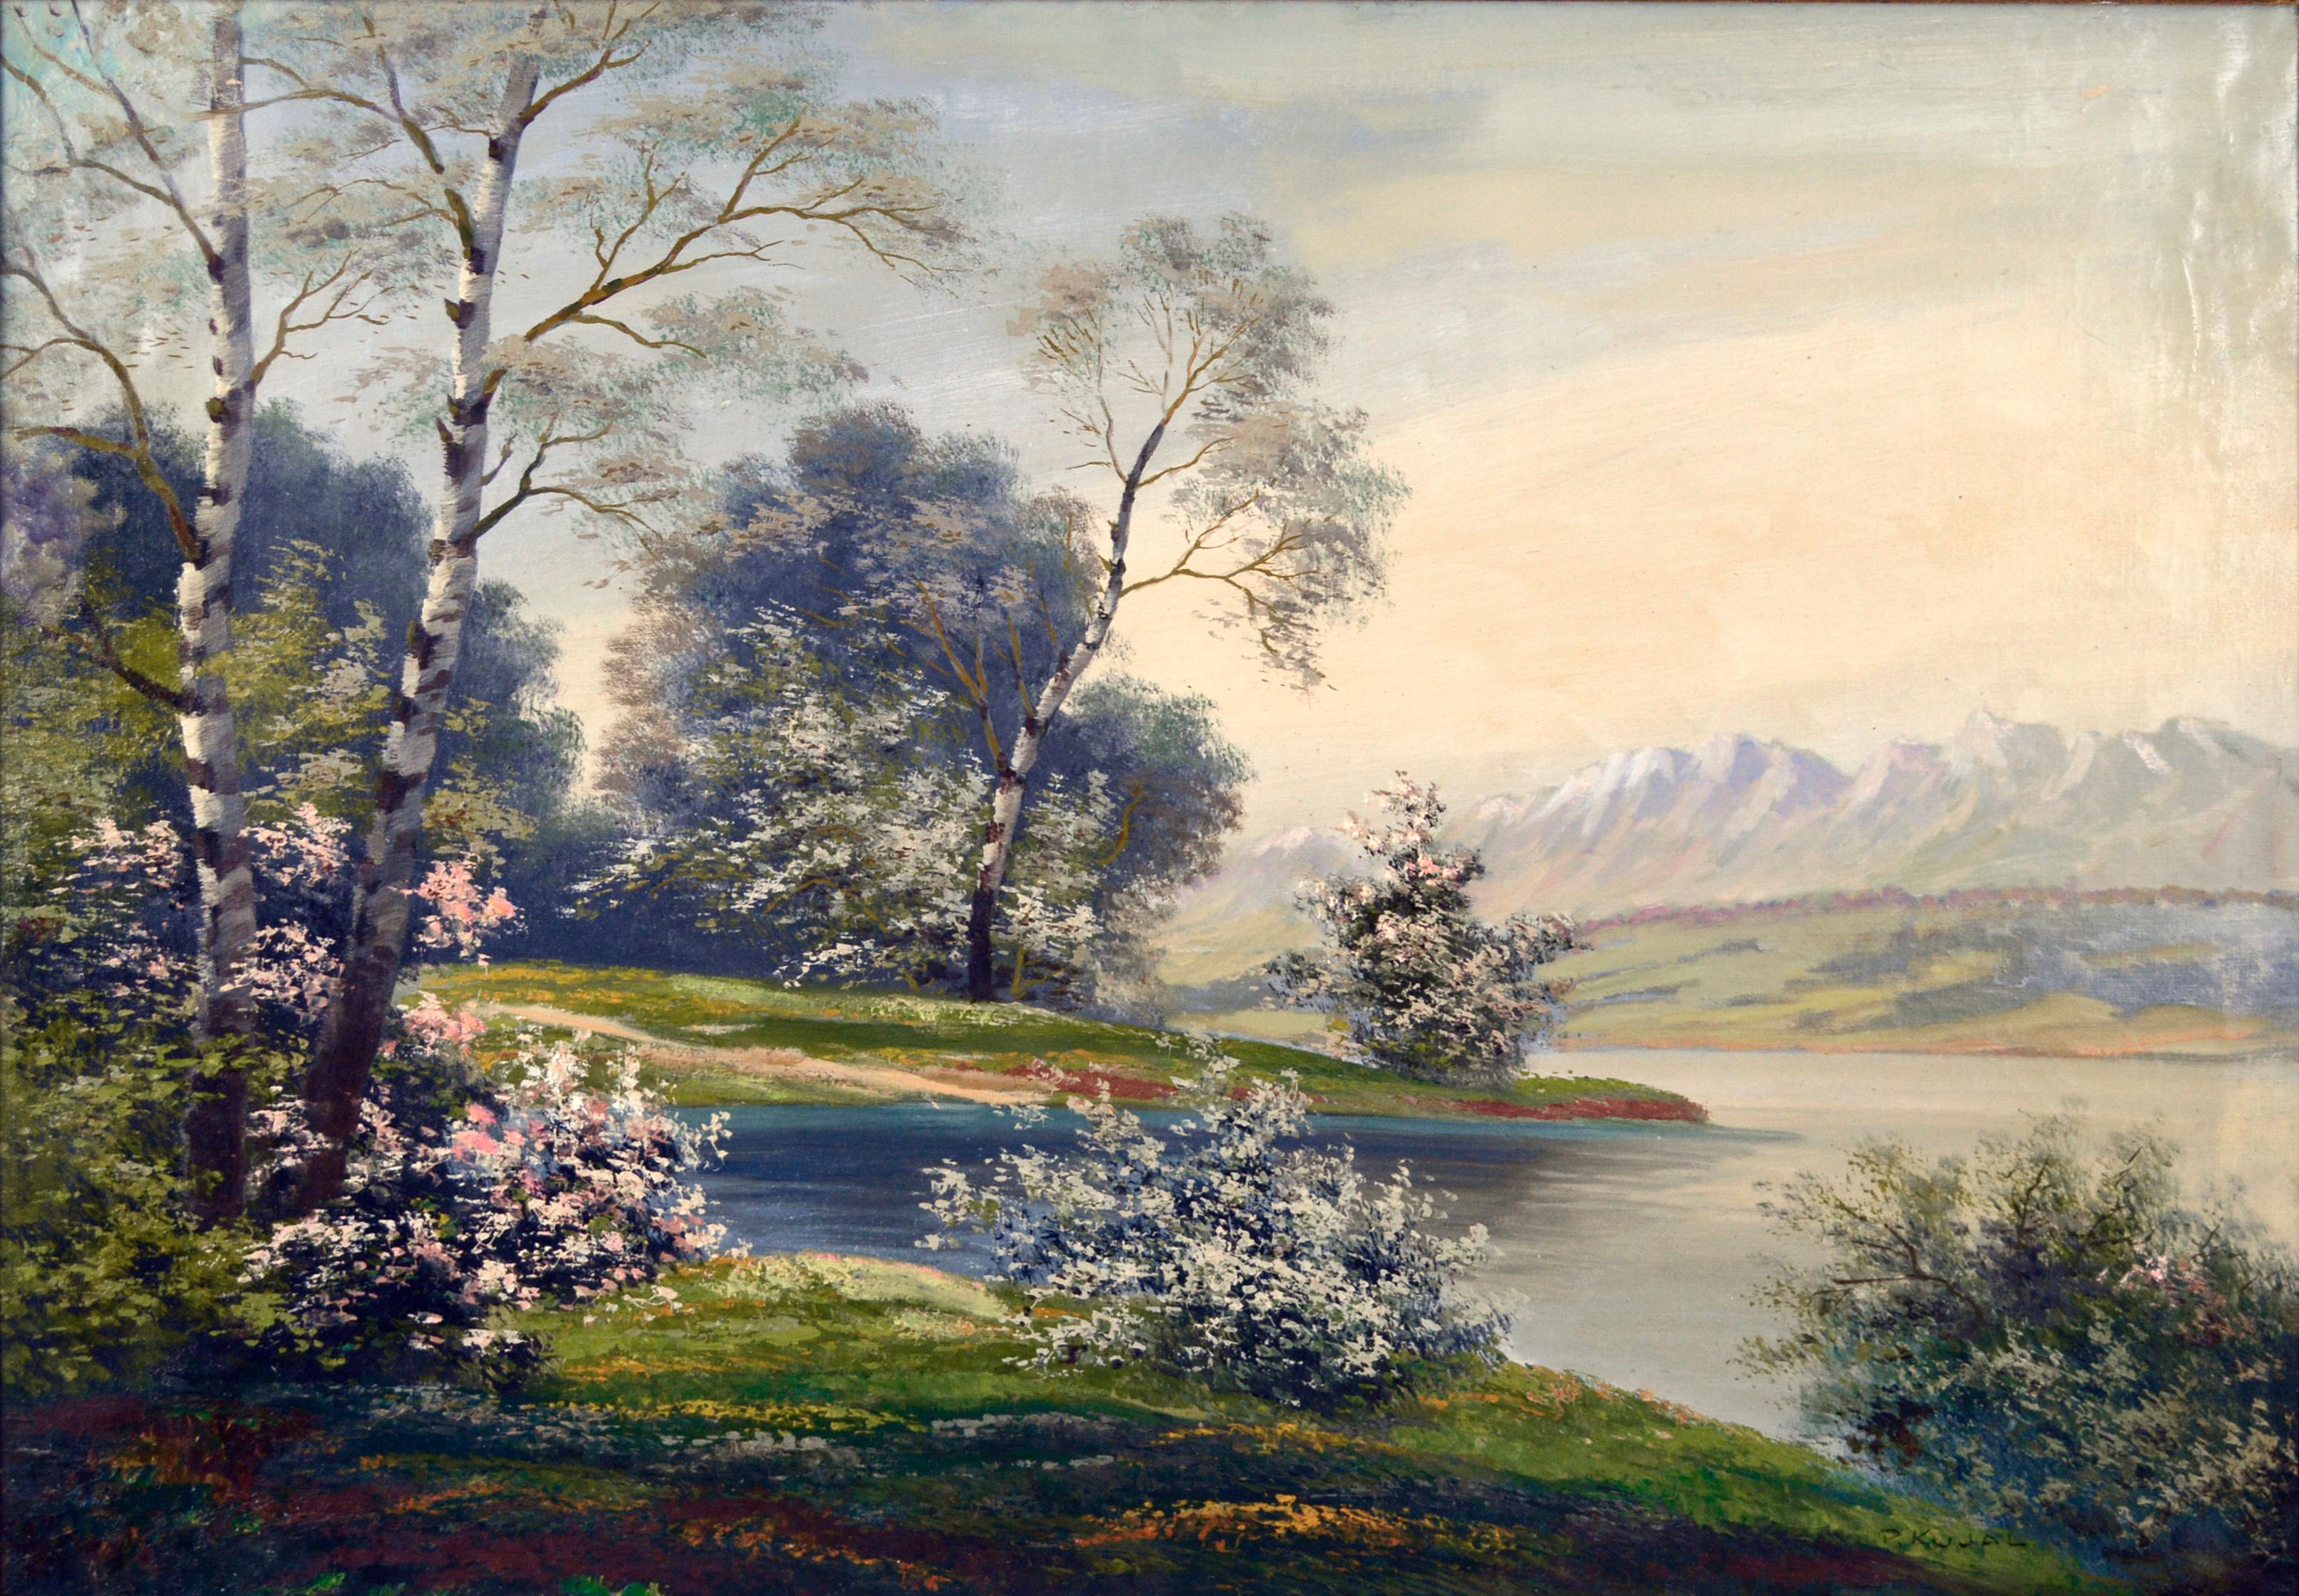 Springtime near the Austrian Alps by Paul Kujal 
Serene depiction looking out over the water with the Austrian Alps in the background by Paul Kujal (Austrian, 1888-1965). In this beautiful mid 20th century spring time scene, a grassy hillside on the